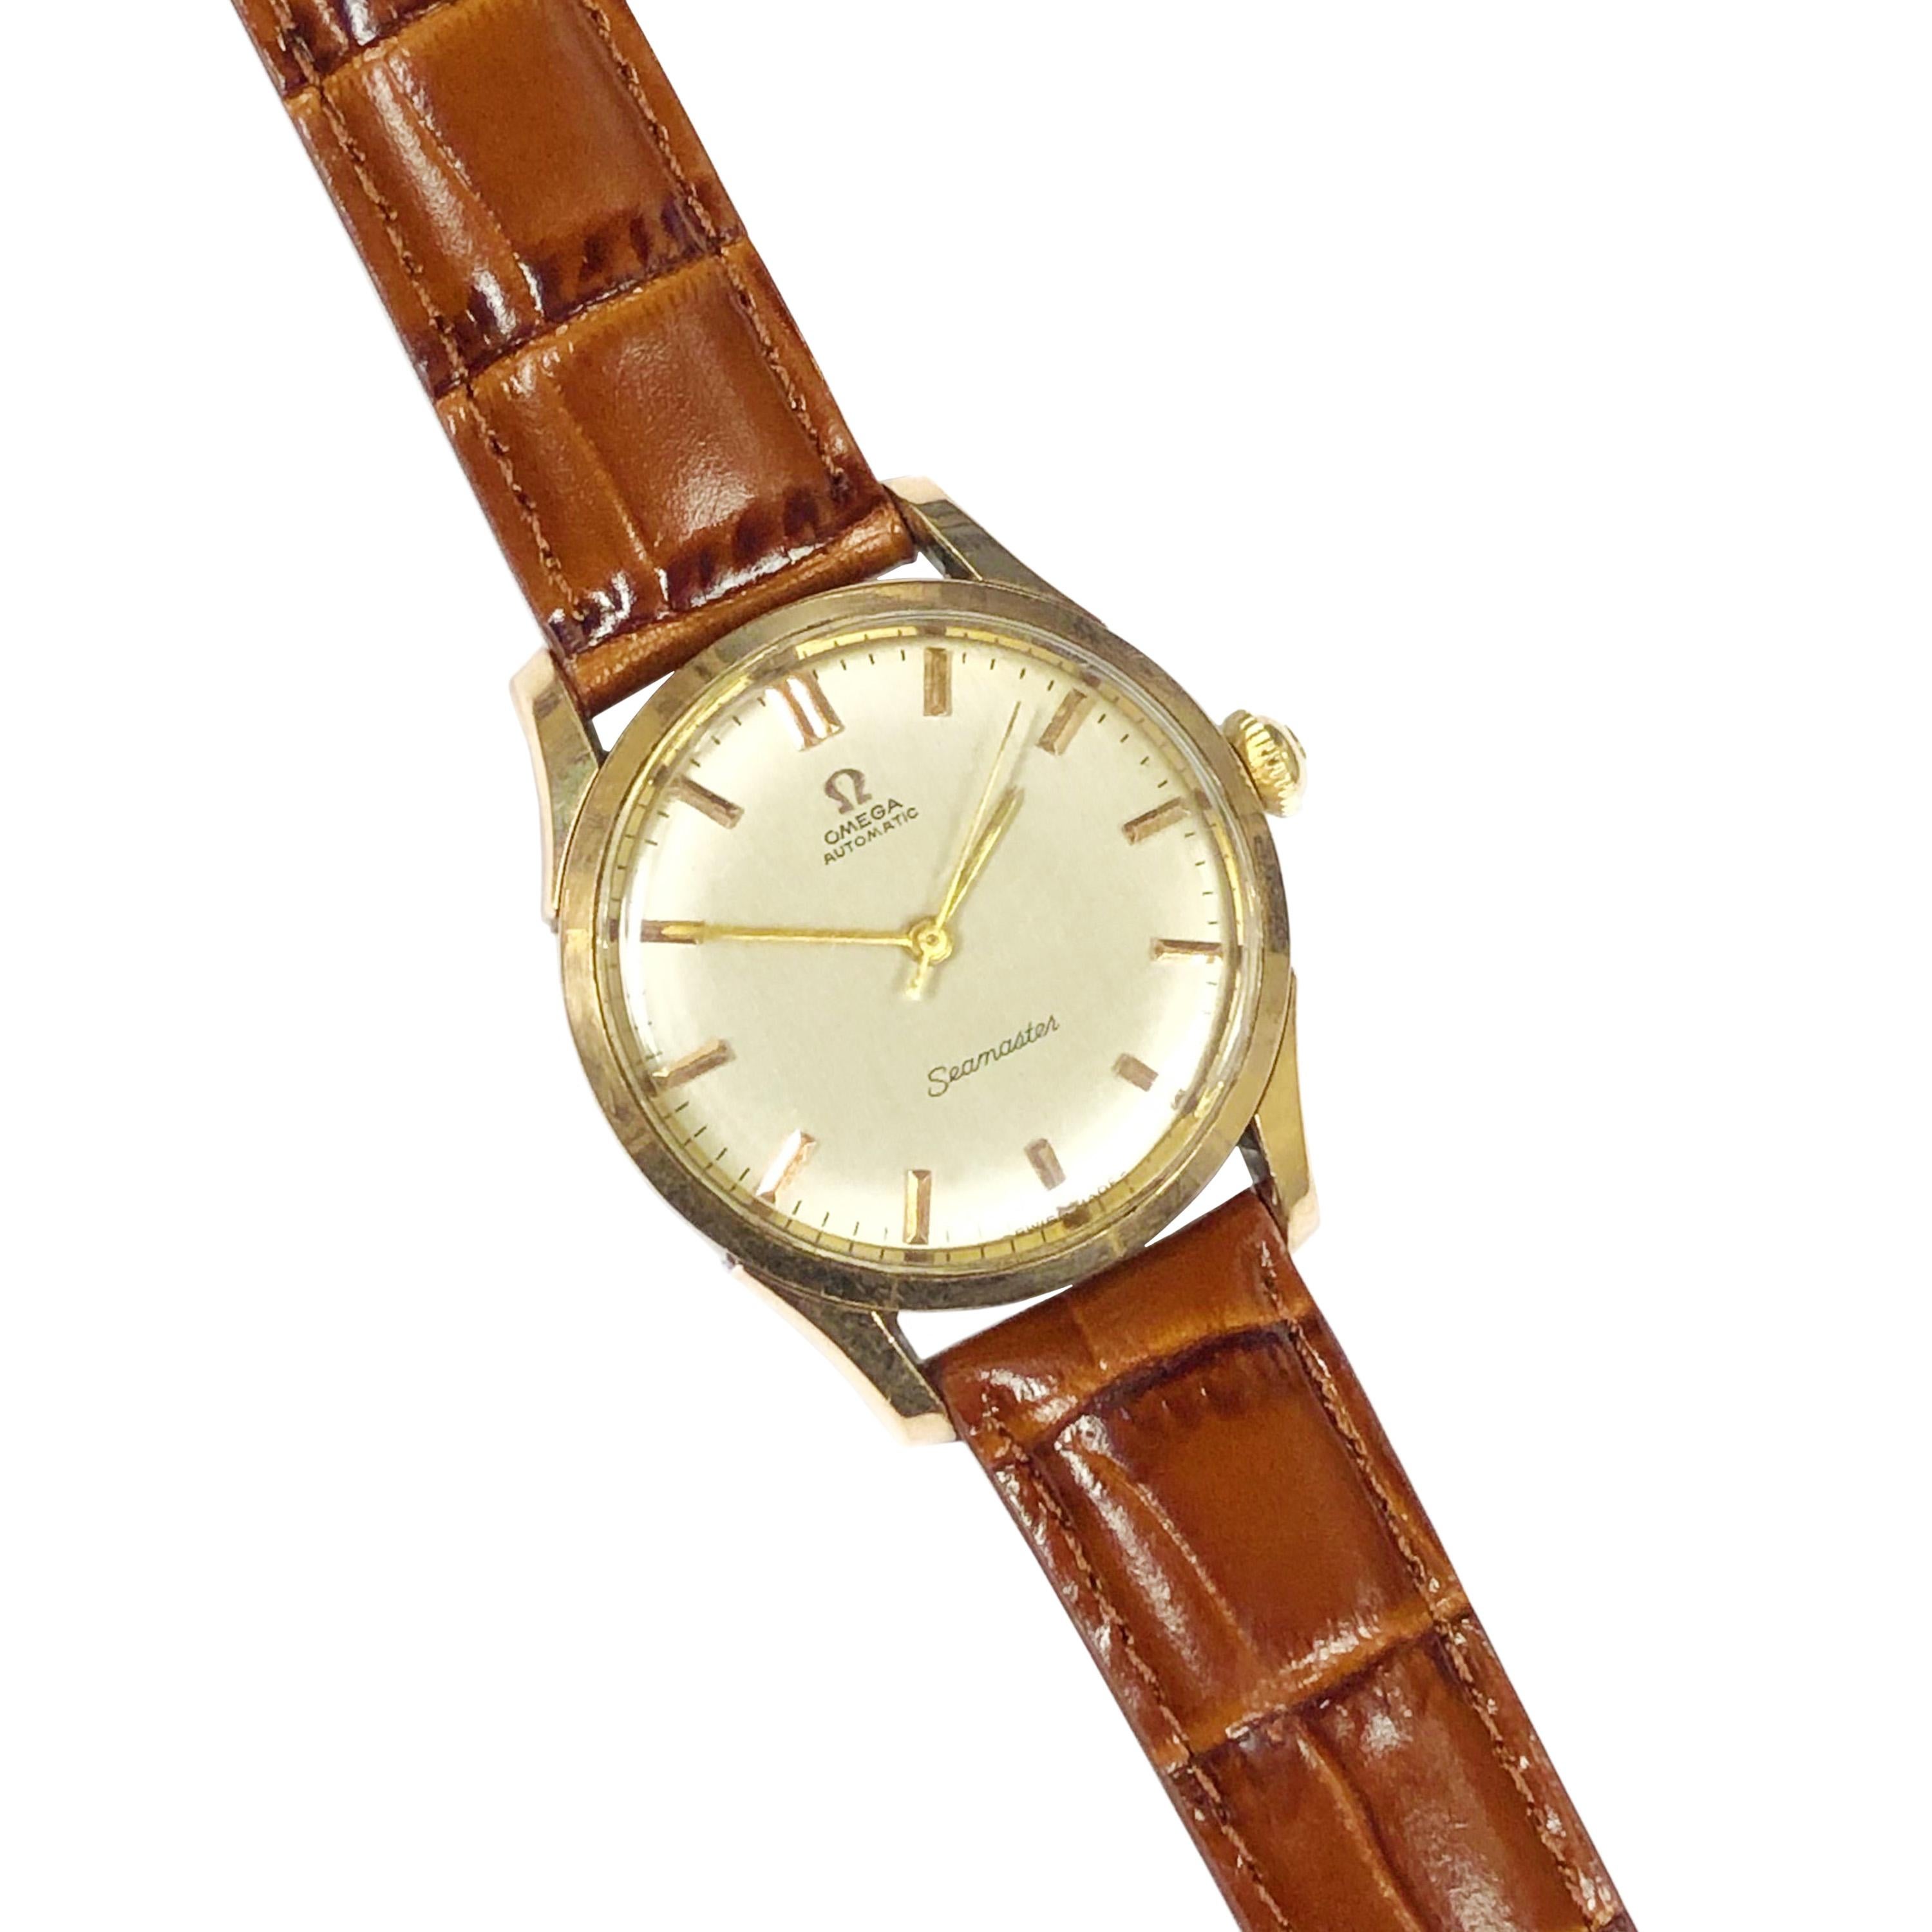 Circa 1960 Omega Seamaster Wrist Watch, 35 MM Water Proof 2 Piece Stainless Steel Case with Yellow Gold Bezel and Gold Lug Tops. Caliber 501 Automatic, self winding movement. Original Mint condition Silvered Dial with Raised Gold Markers, Gold hands